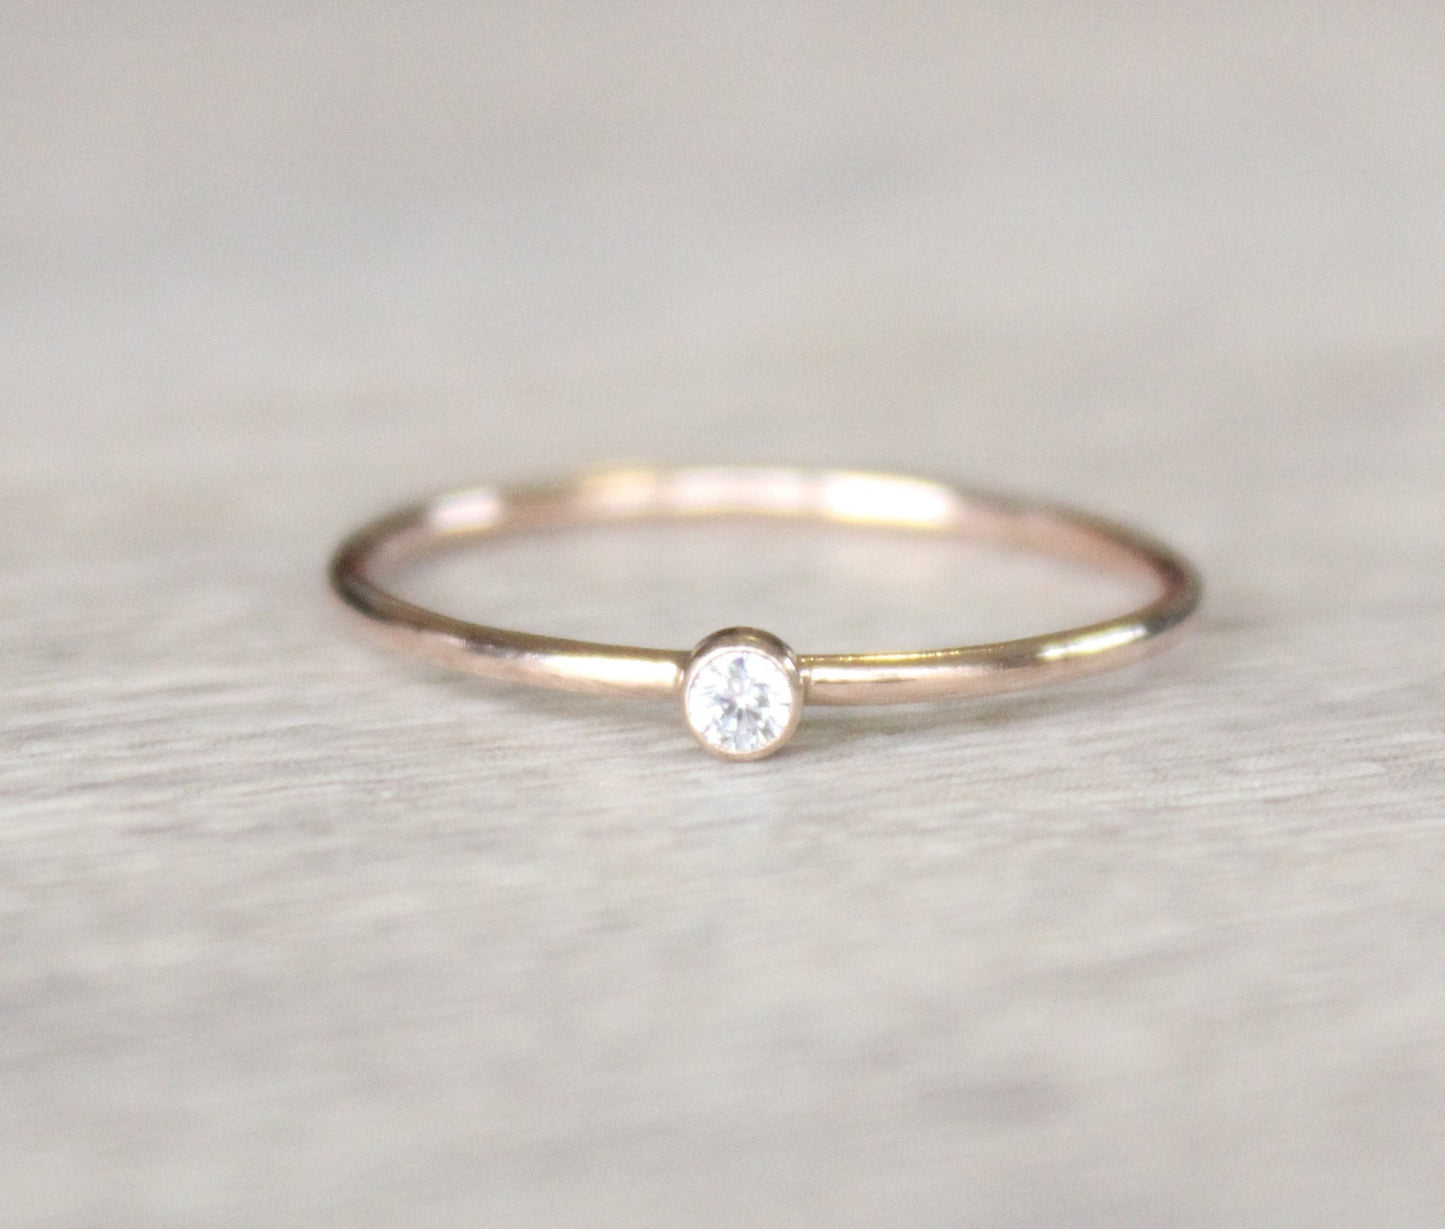 Rose Gold Simulated Diamond Ring // 14K Rose Gold Filled Cubic Zirconia Stacking Rings // April Birthstone Rings// Slim CZ Stacking Ring